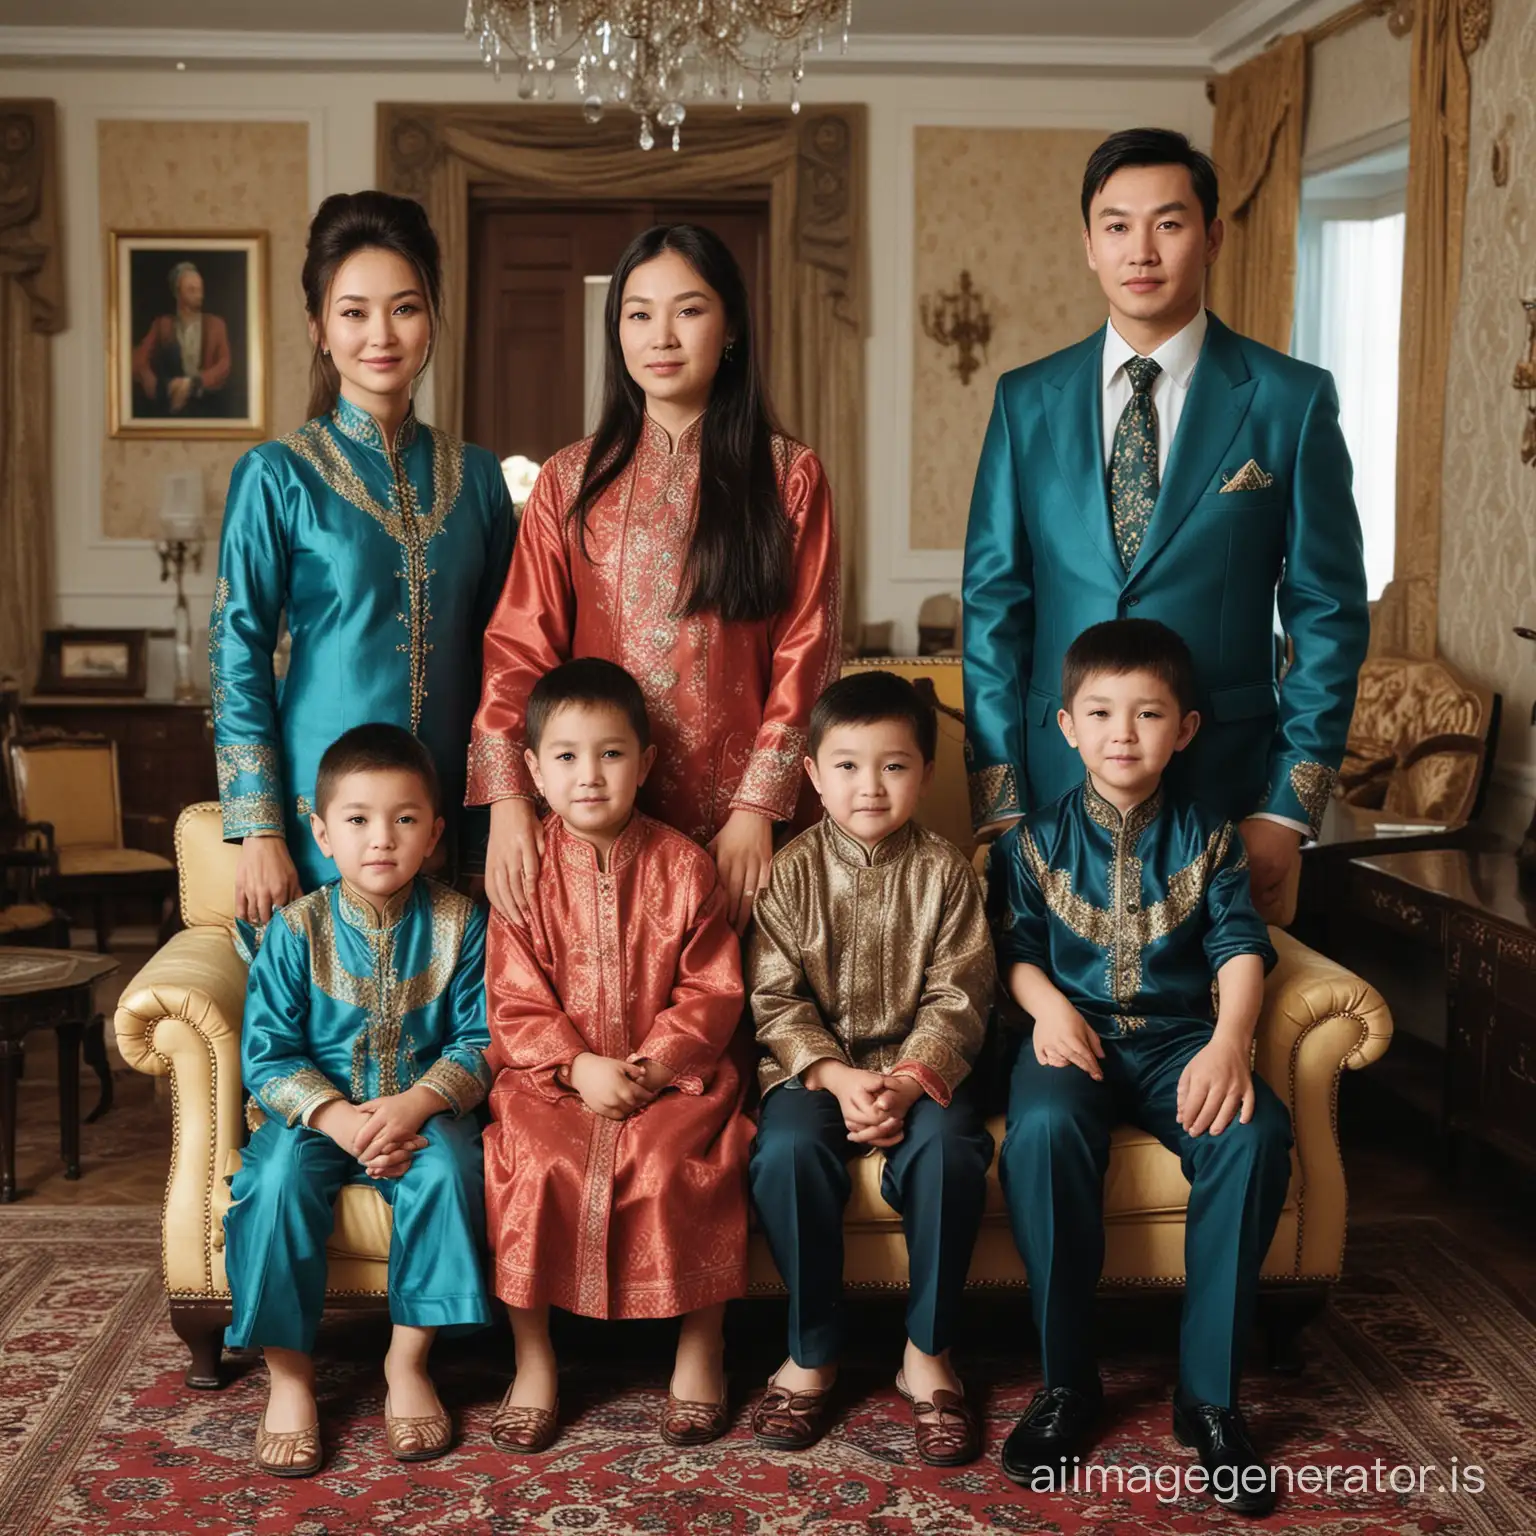 Stylish-Upper-Middle-Class-Kazakh-Family-Embracing-Family-Values-at-Home